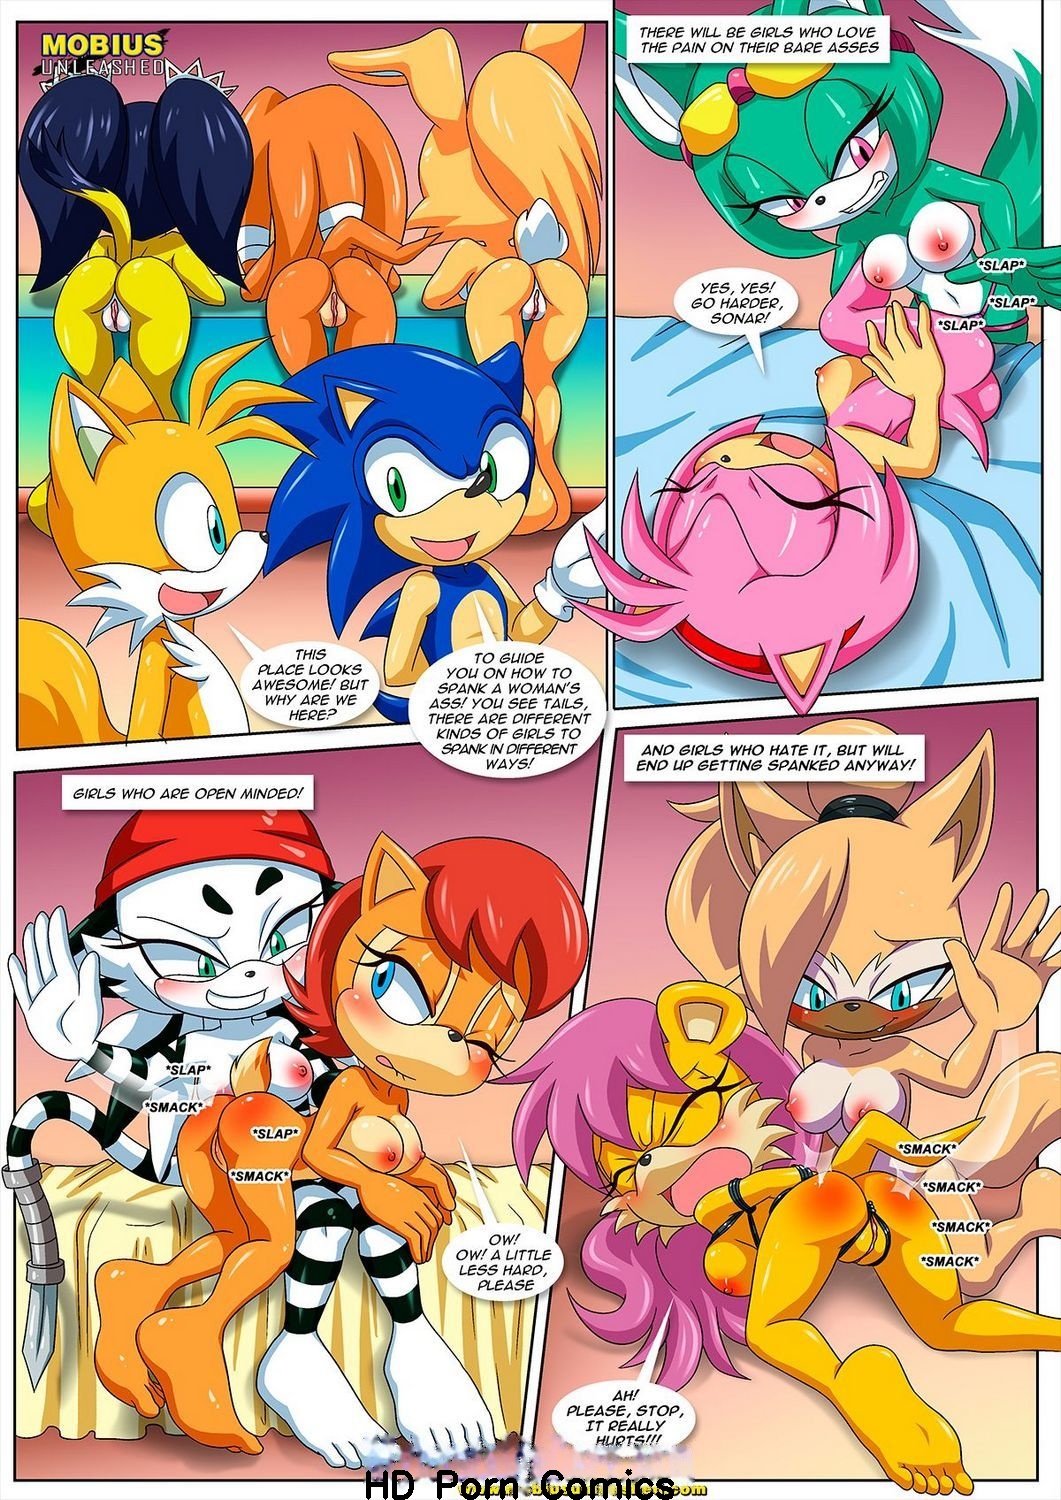 Please Stop Spanking - Sonic's Guide To Spanking comic porn â€“ HD Porn Comics